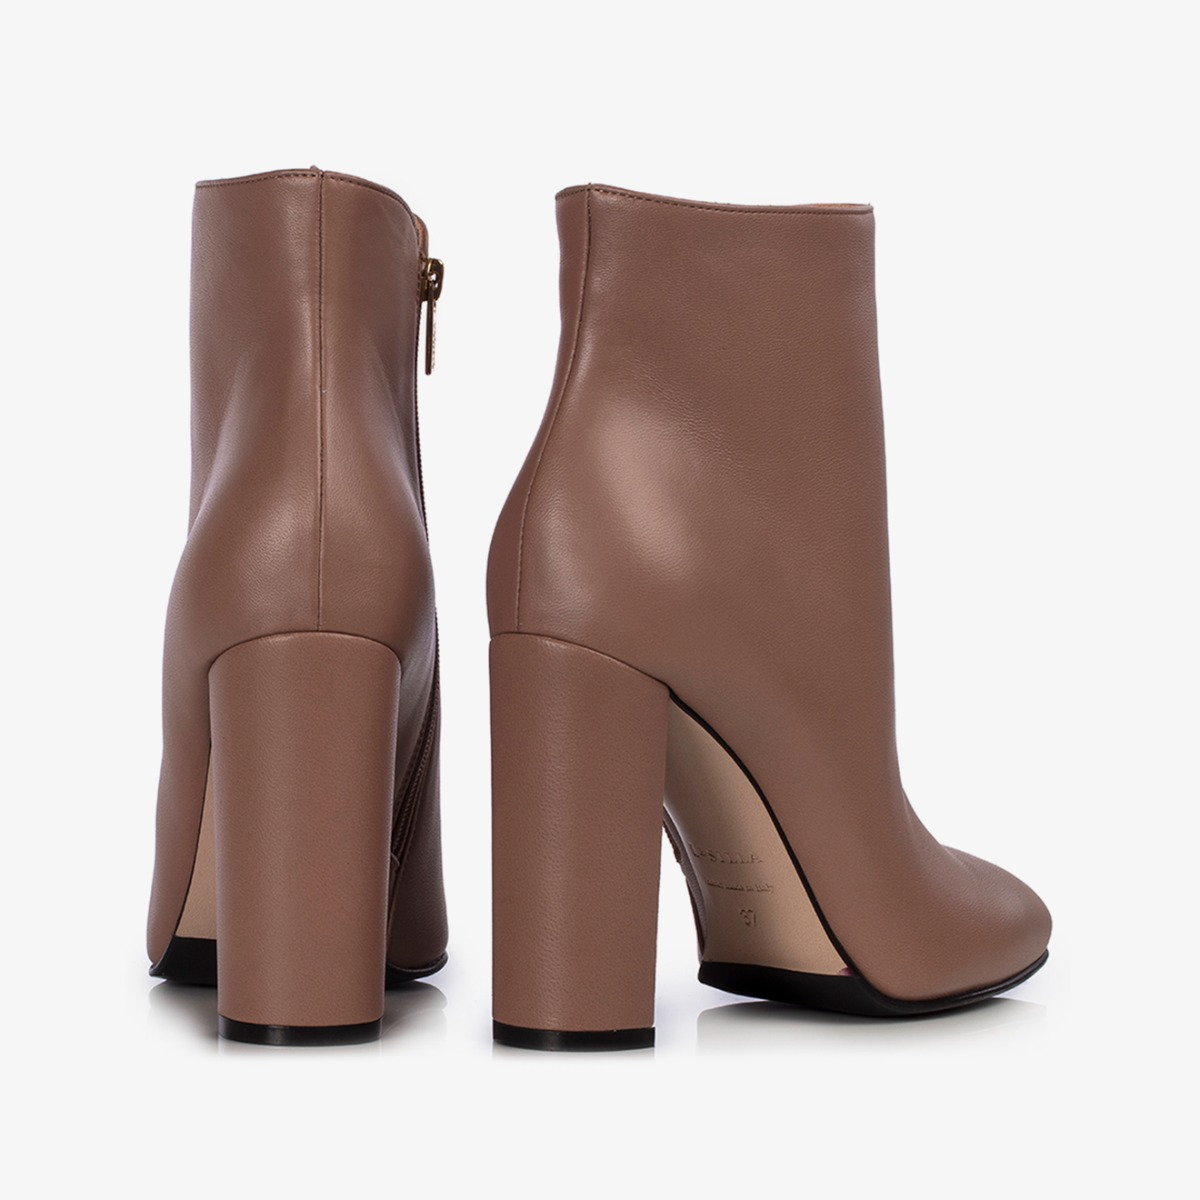 ELSA ANKLE BOOT 110 mm - Le Silla official outlet